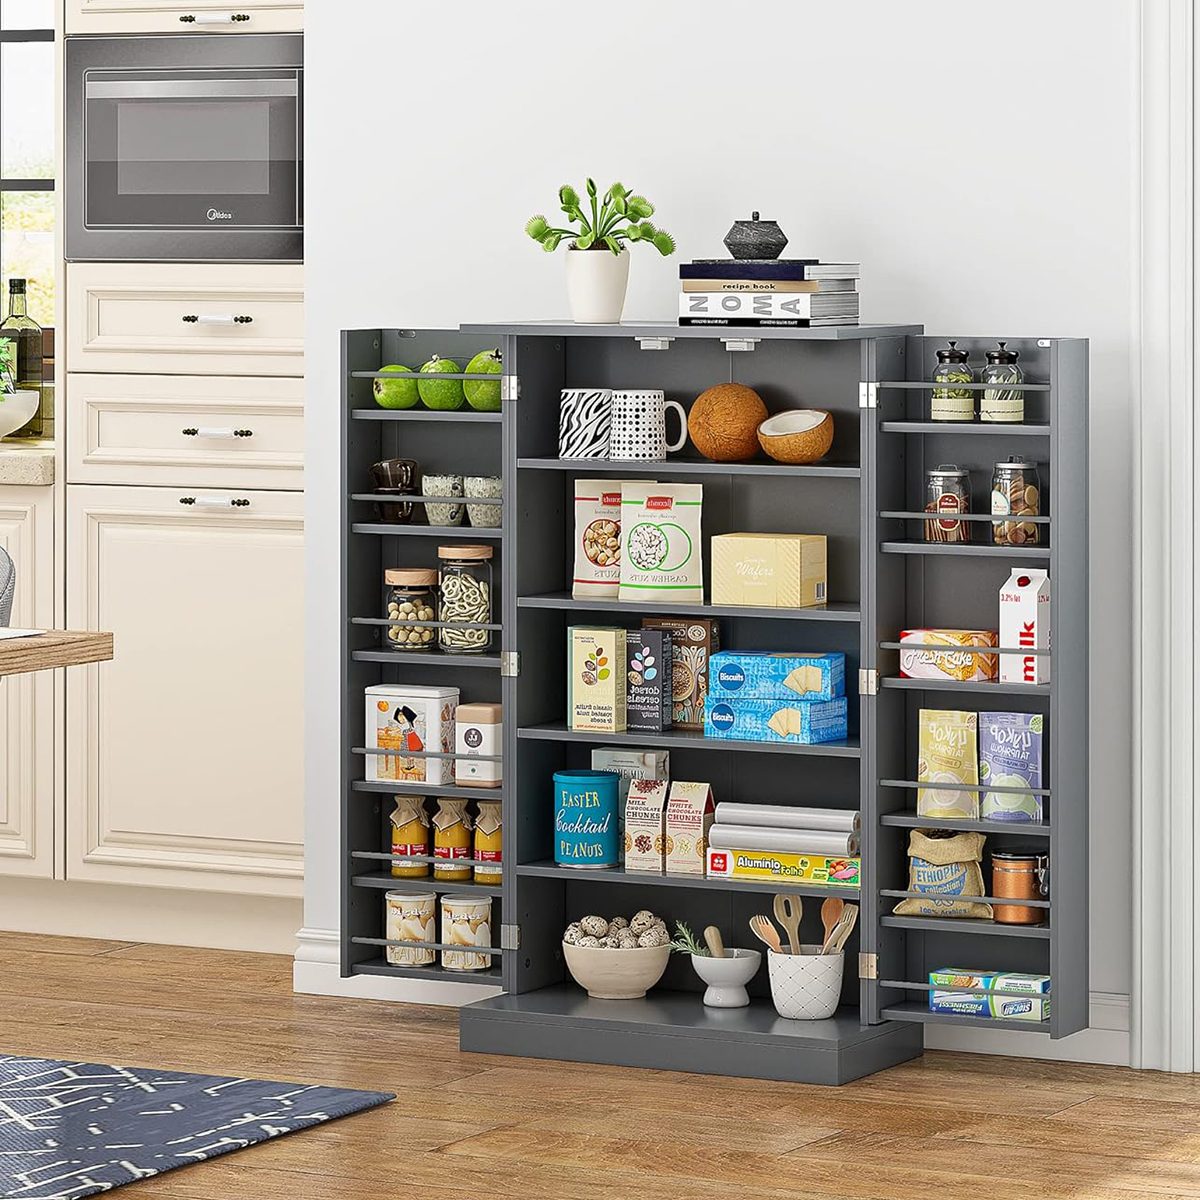 7 Kitchen Storage Cabinets for Small Spaces